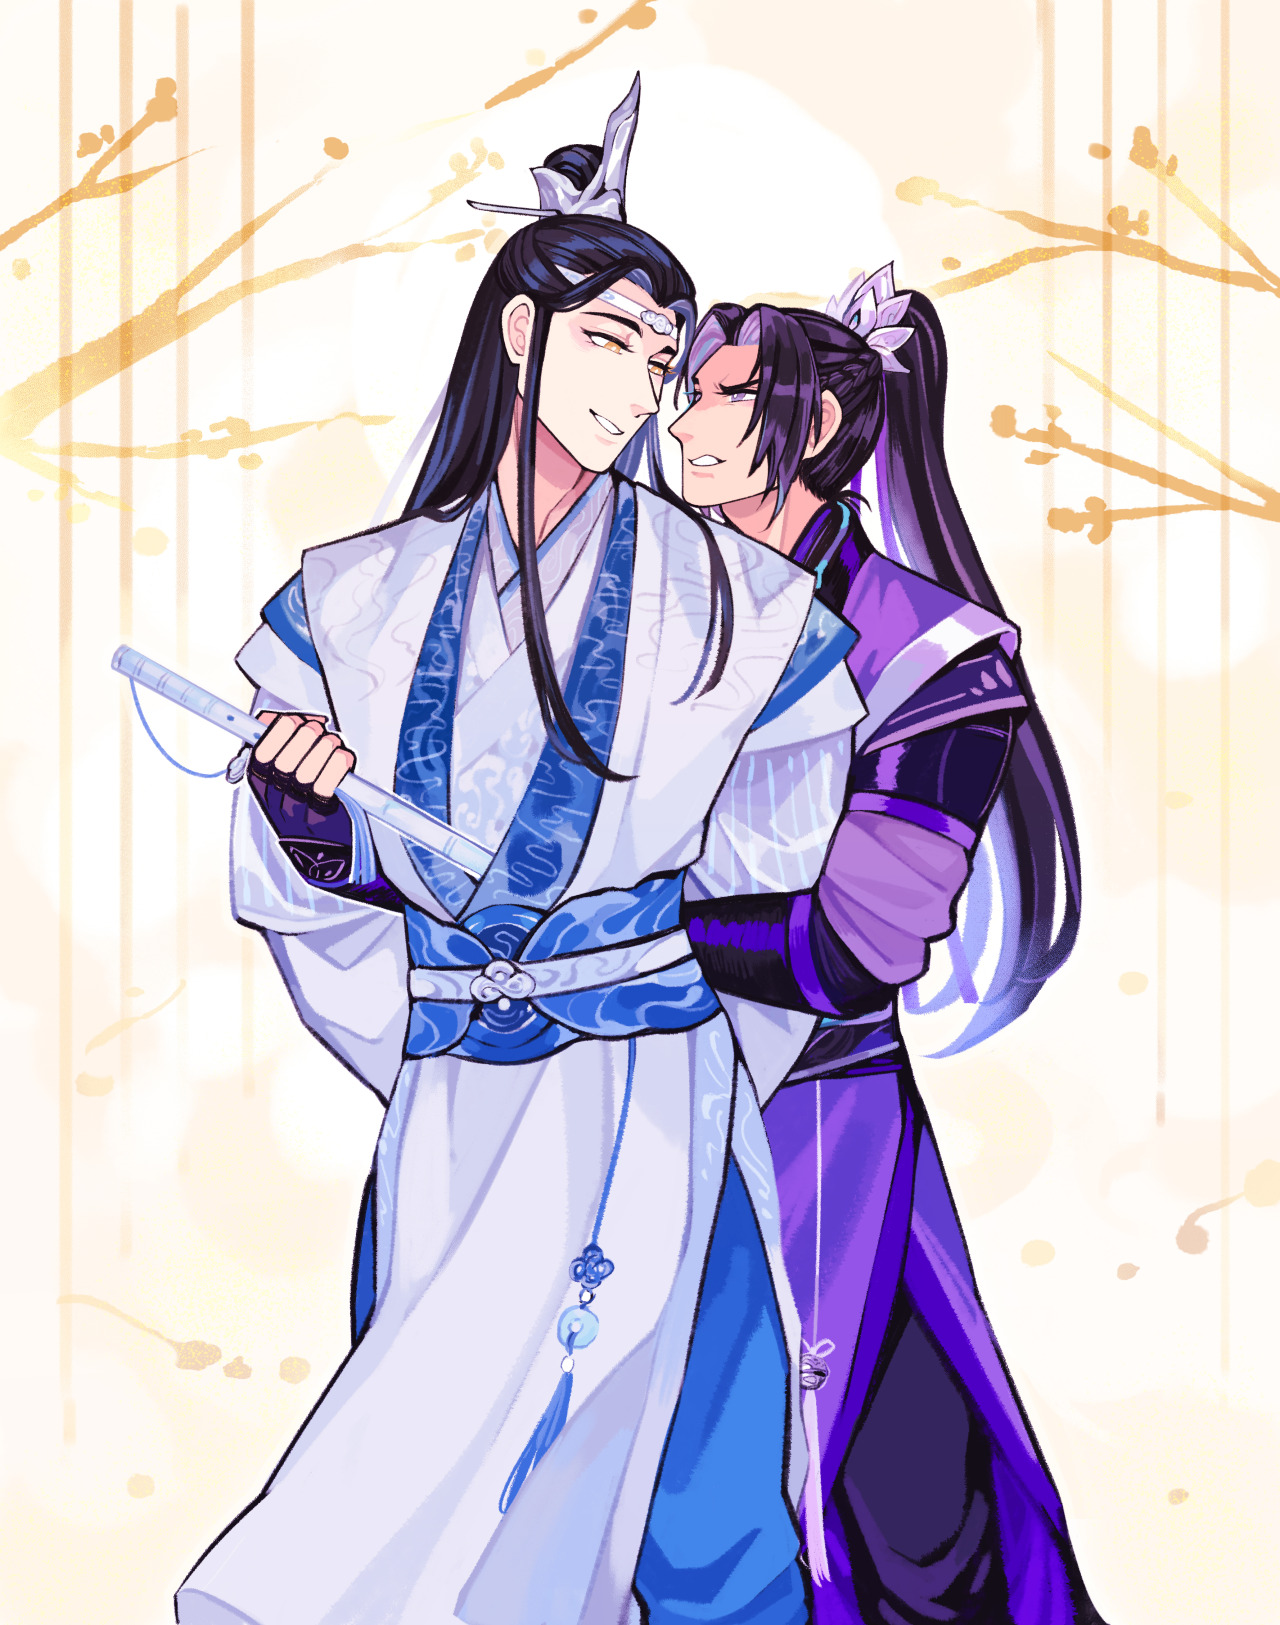 is that your xiao in your robes or are you just very happy to spar with me, Zewu-jun? #Lan Xichen#Jiang Cheng#Xicheng#MDZS #Mo Dao Zu Shi  #sorry got the xiao and dizi mixed up  #in my defense my brain is fried lol